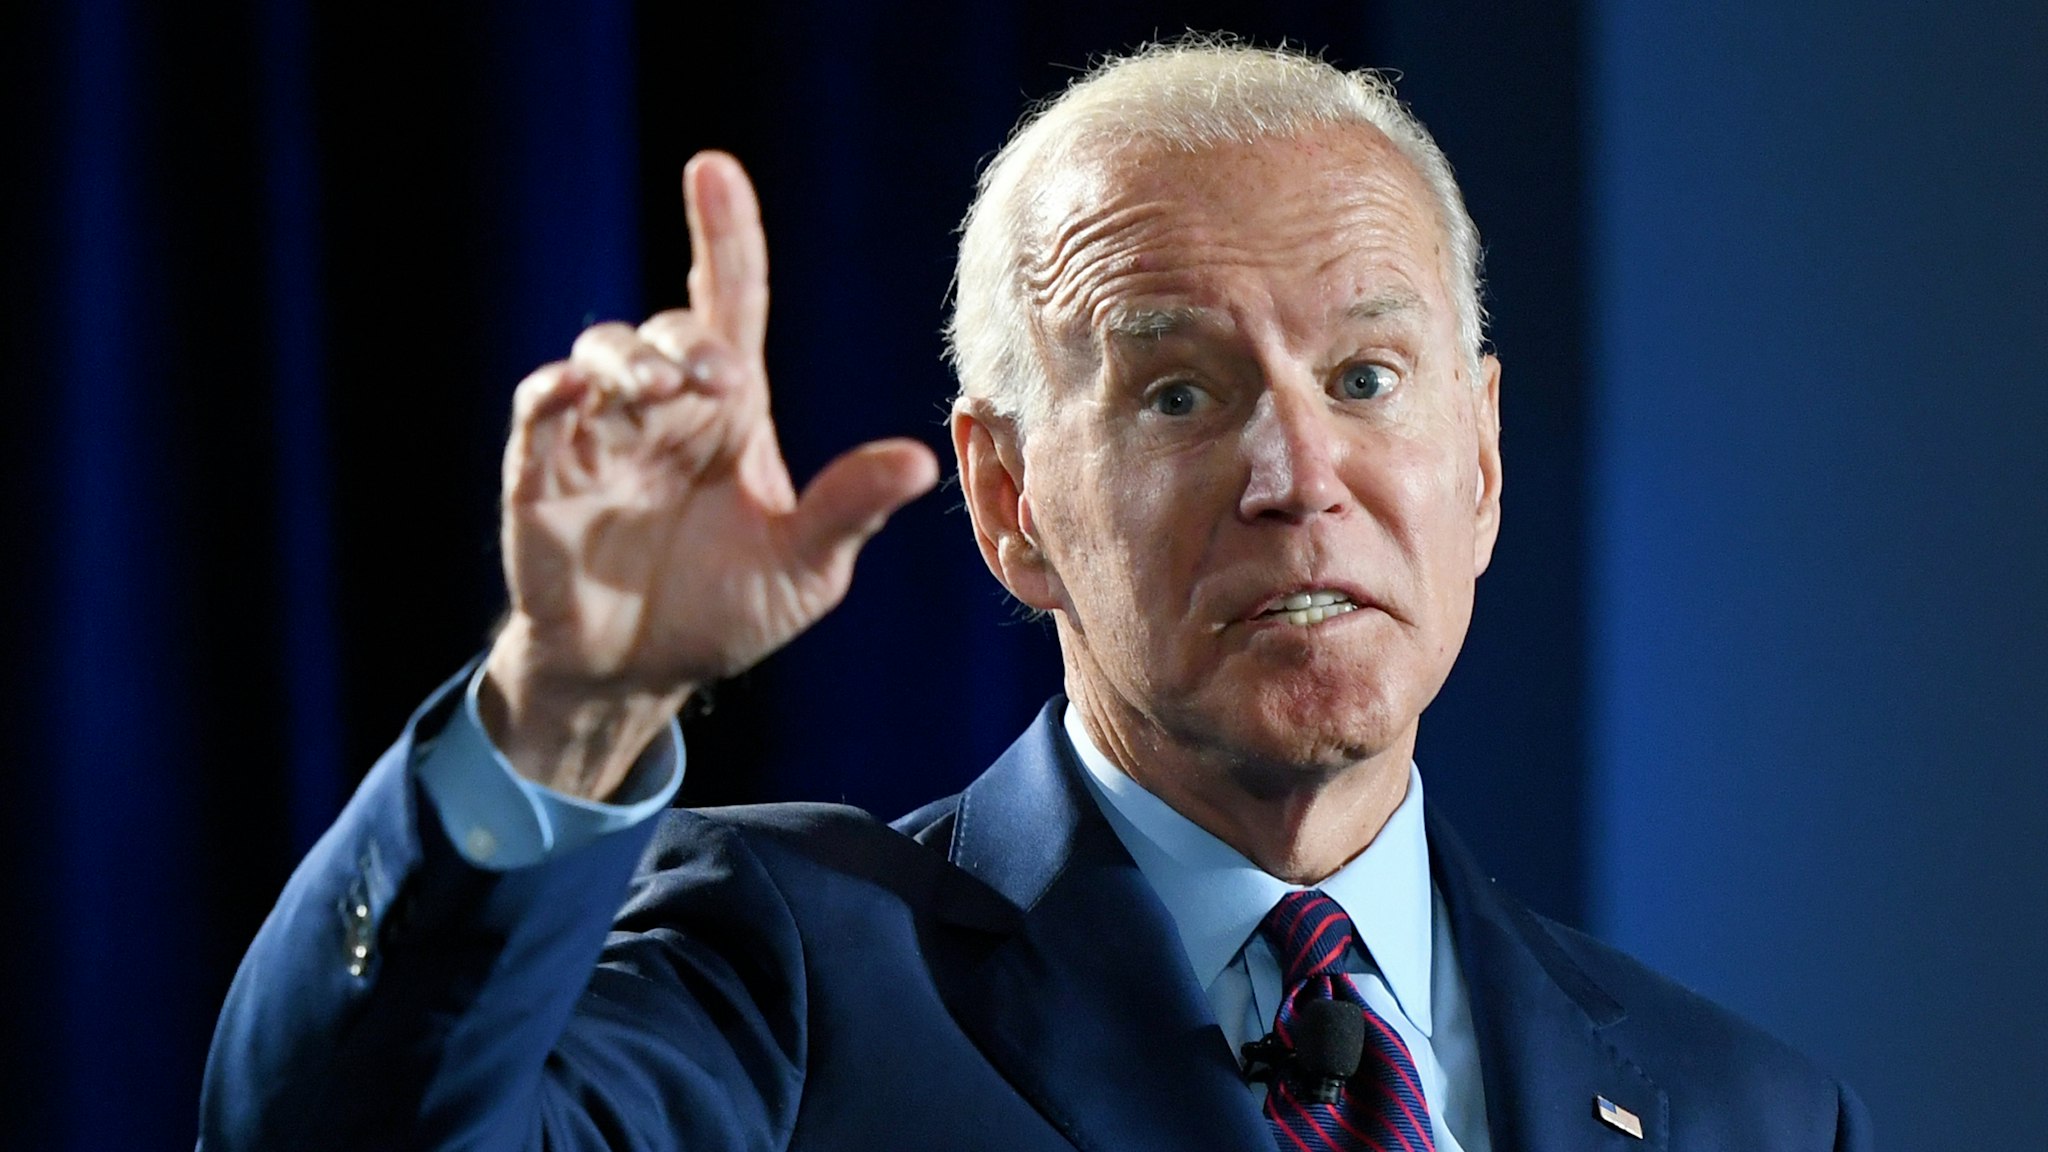 LAS VEGAS, NEVADA - AUGUST 03: Democratic presidential candidate and former U.S. Vice President Joe Biden speaks during the 2020 Public Service Forum hosted by the American Federation of State, County and Municipal Employees (AFSCME) at UNLV on August 3, 2019 in Las Vegas, Nevada. Nineteen of the 24 candidates running for the Democratic party's 2020 presidential nomination are addressing union members in a state with one of the largest organized labor populations in the United States.